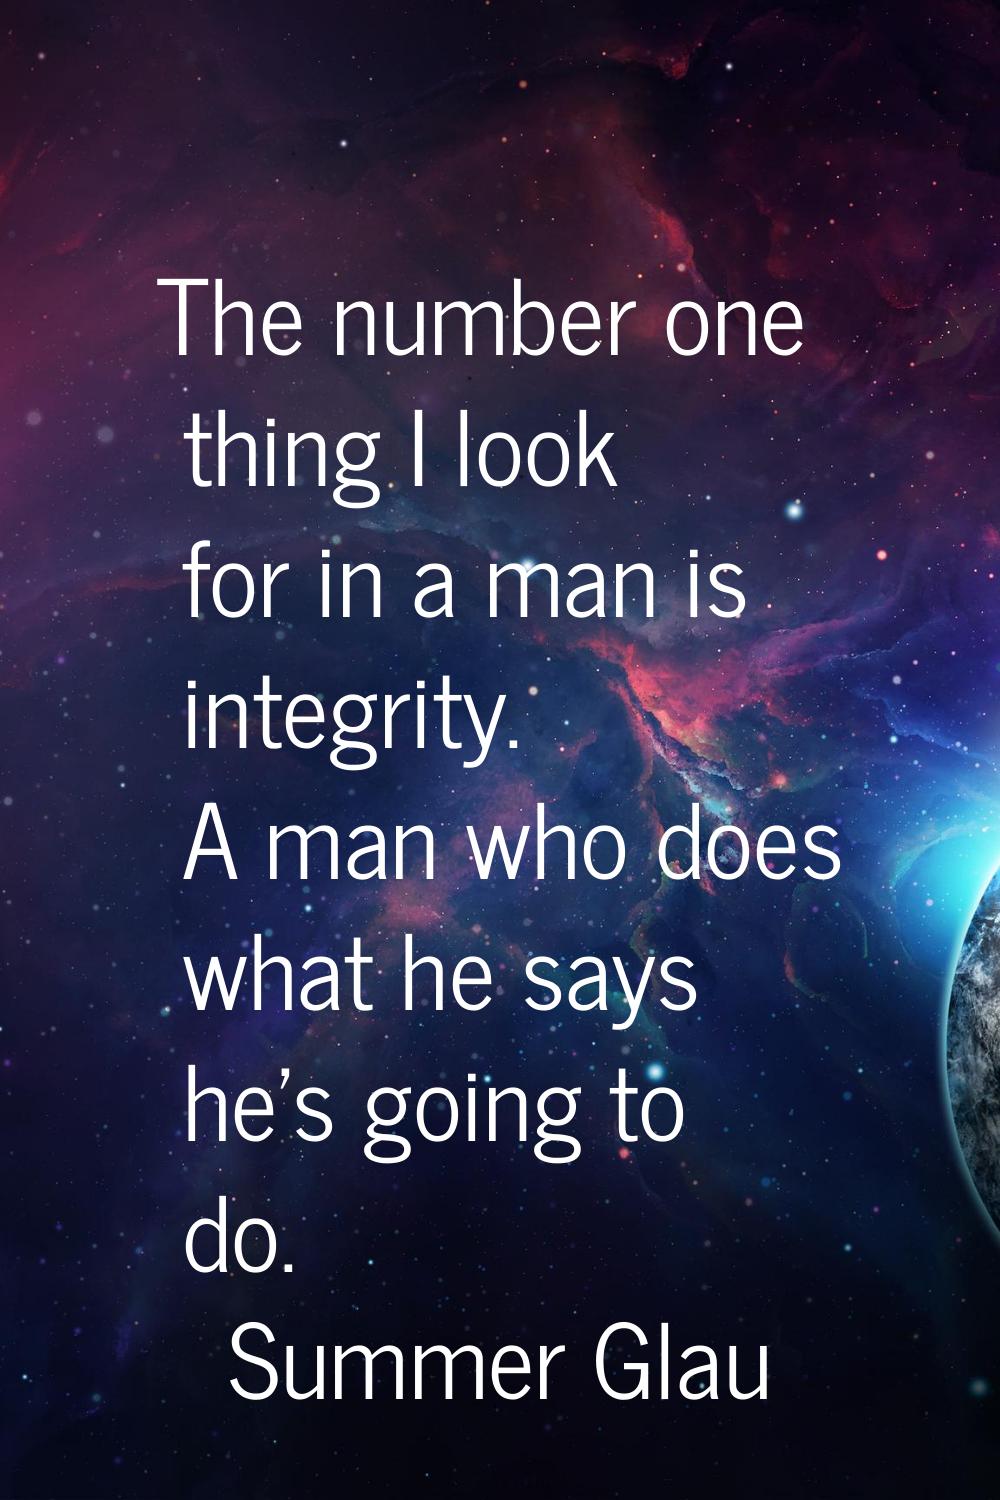 The number one thing I look for in a man is integrity. A man who does what he says he's going to do